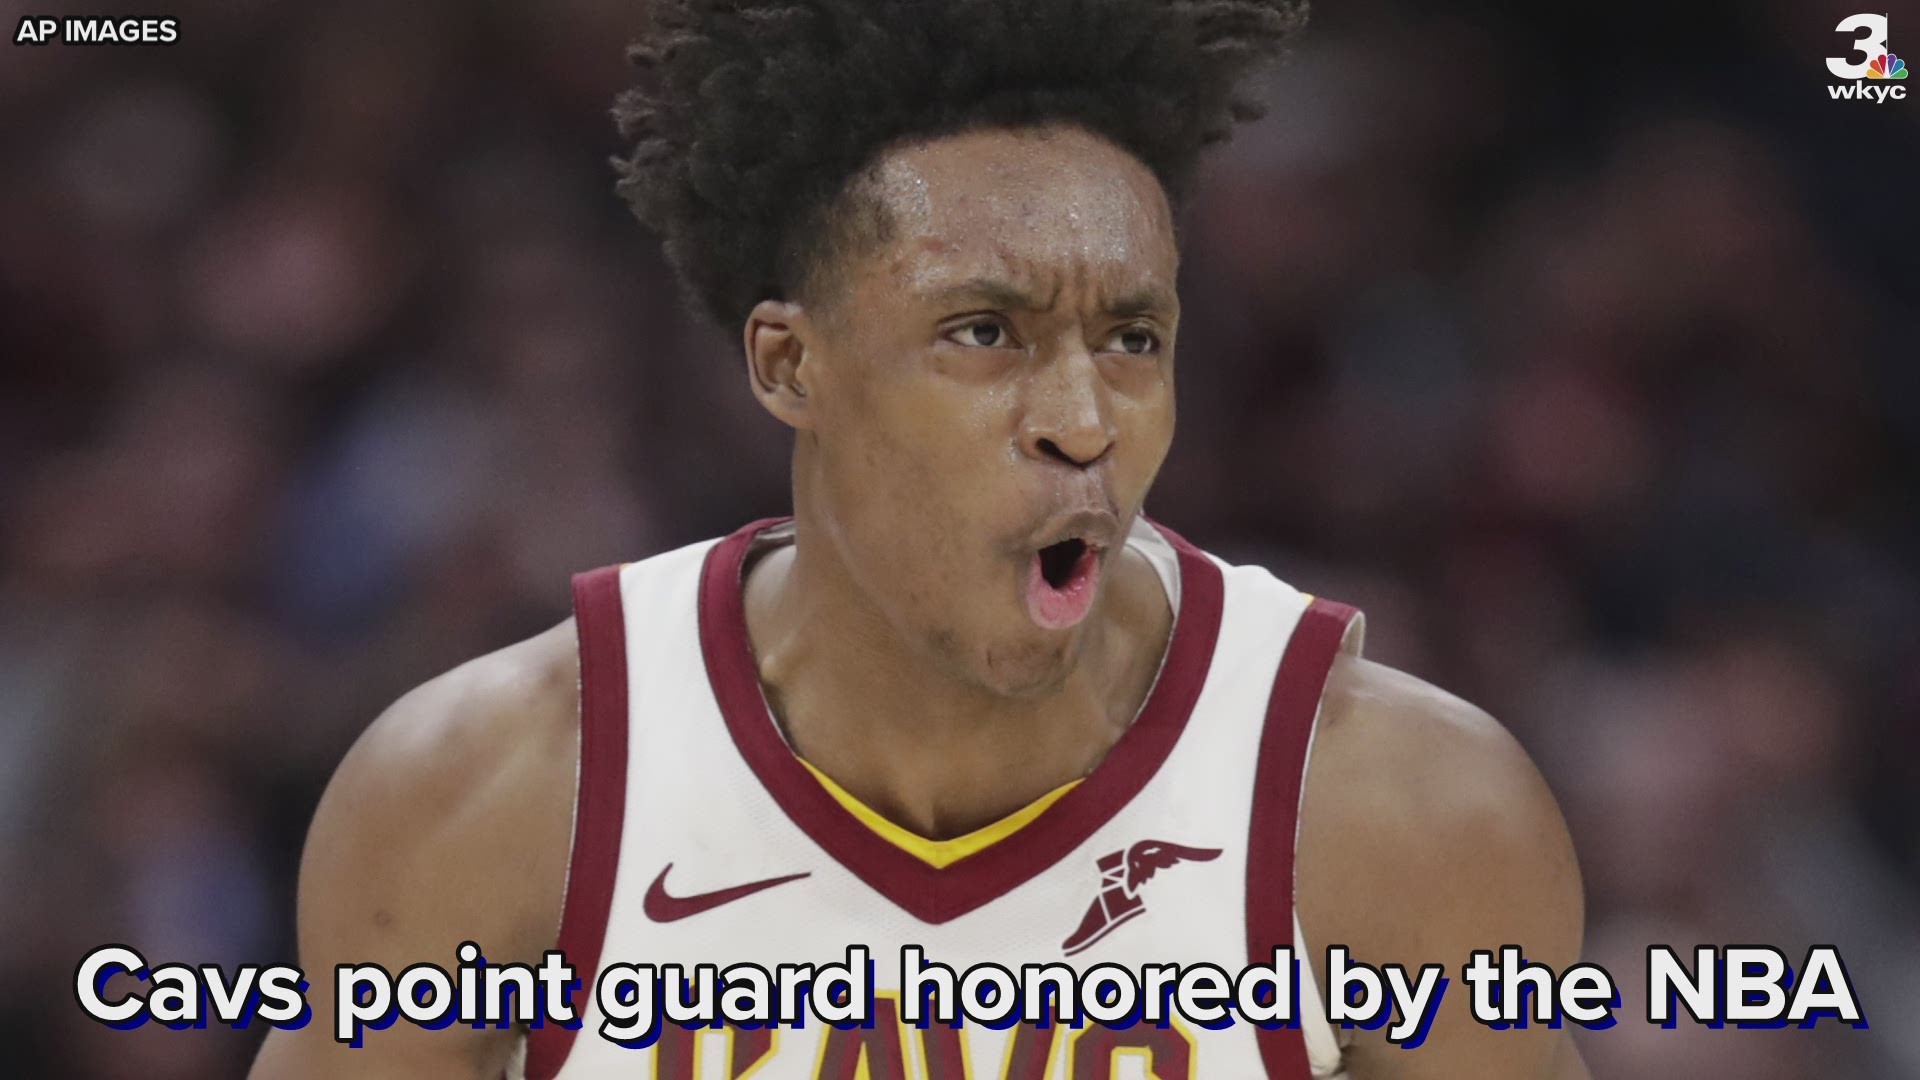 On Tuesday, the NBA announced its All-Rookie teams, which included Cleveland Cavaliers point guard Collin Sexton on the second team.